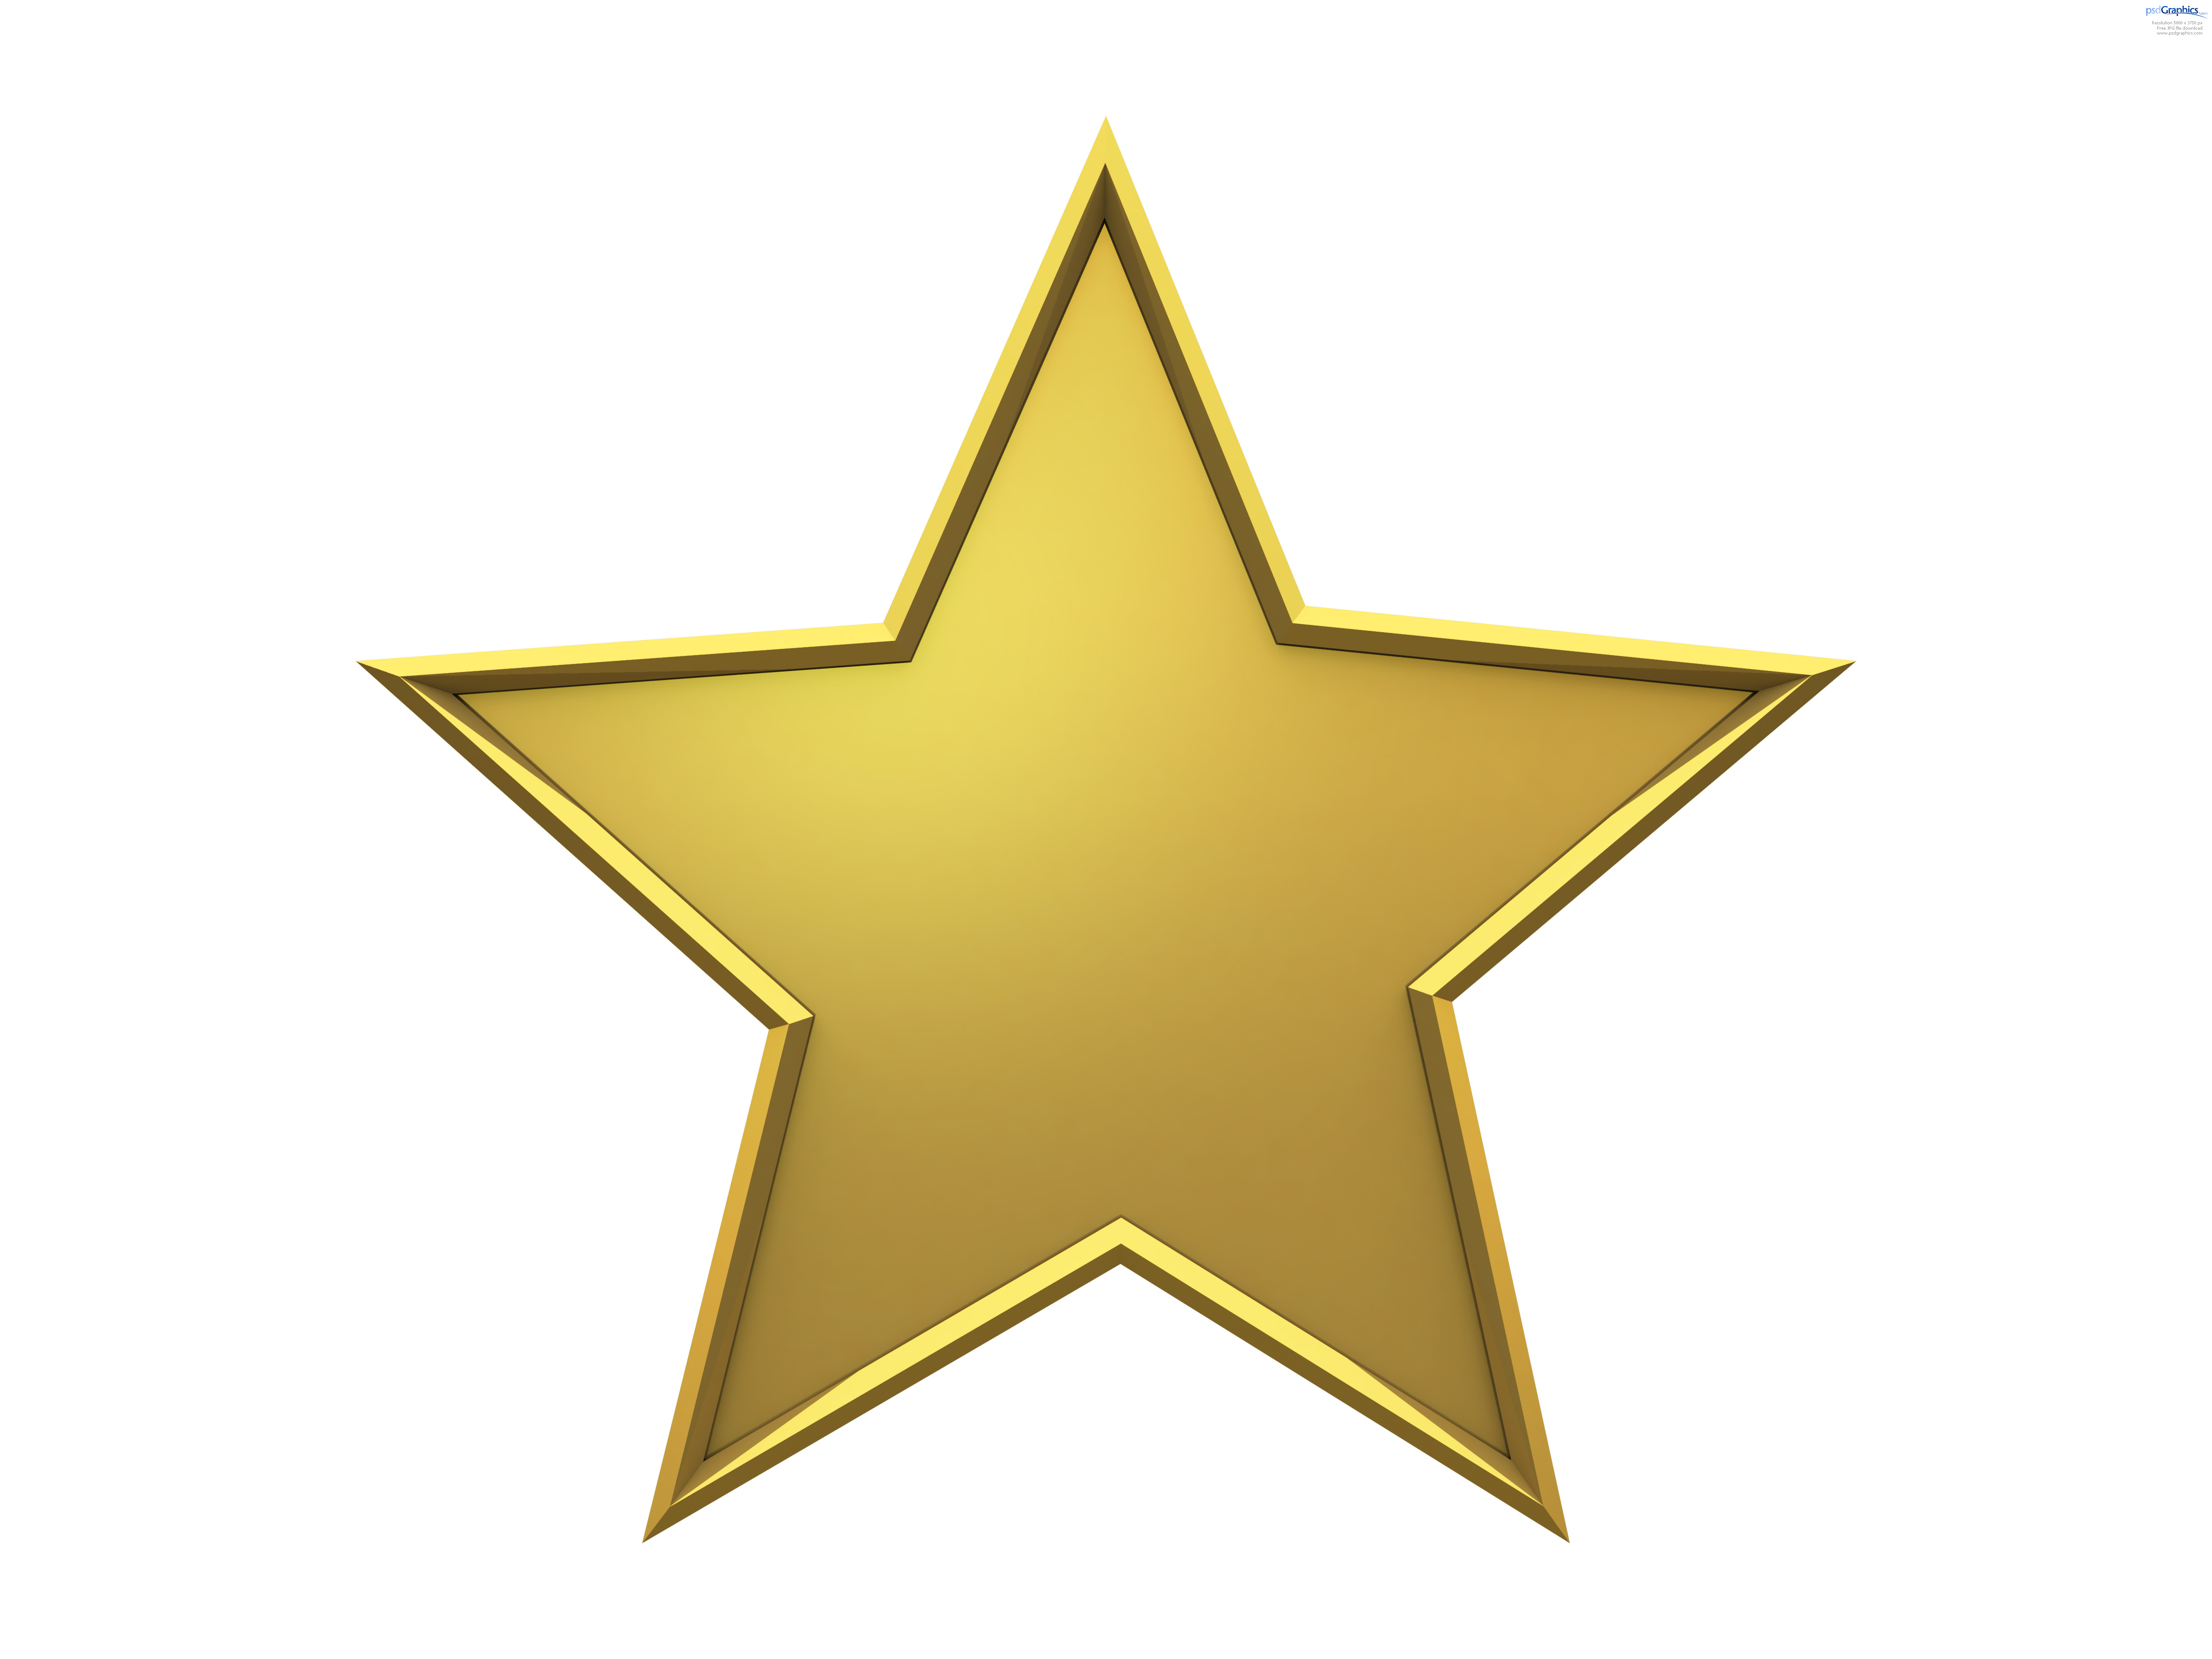 You Are A Star Clipart